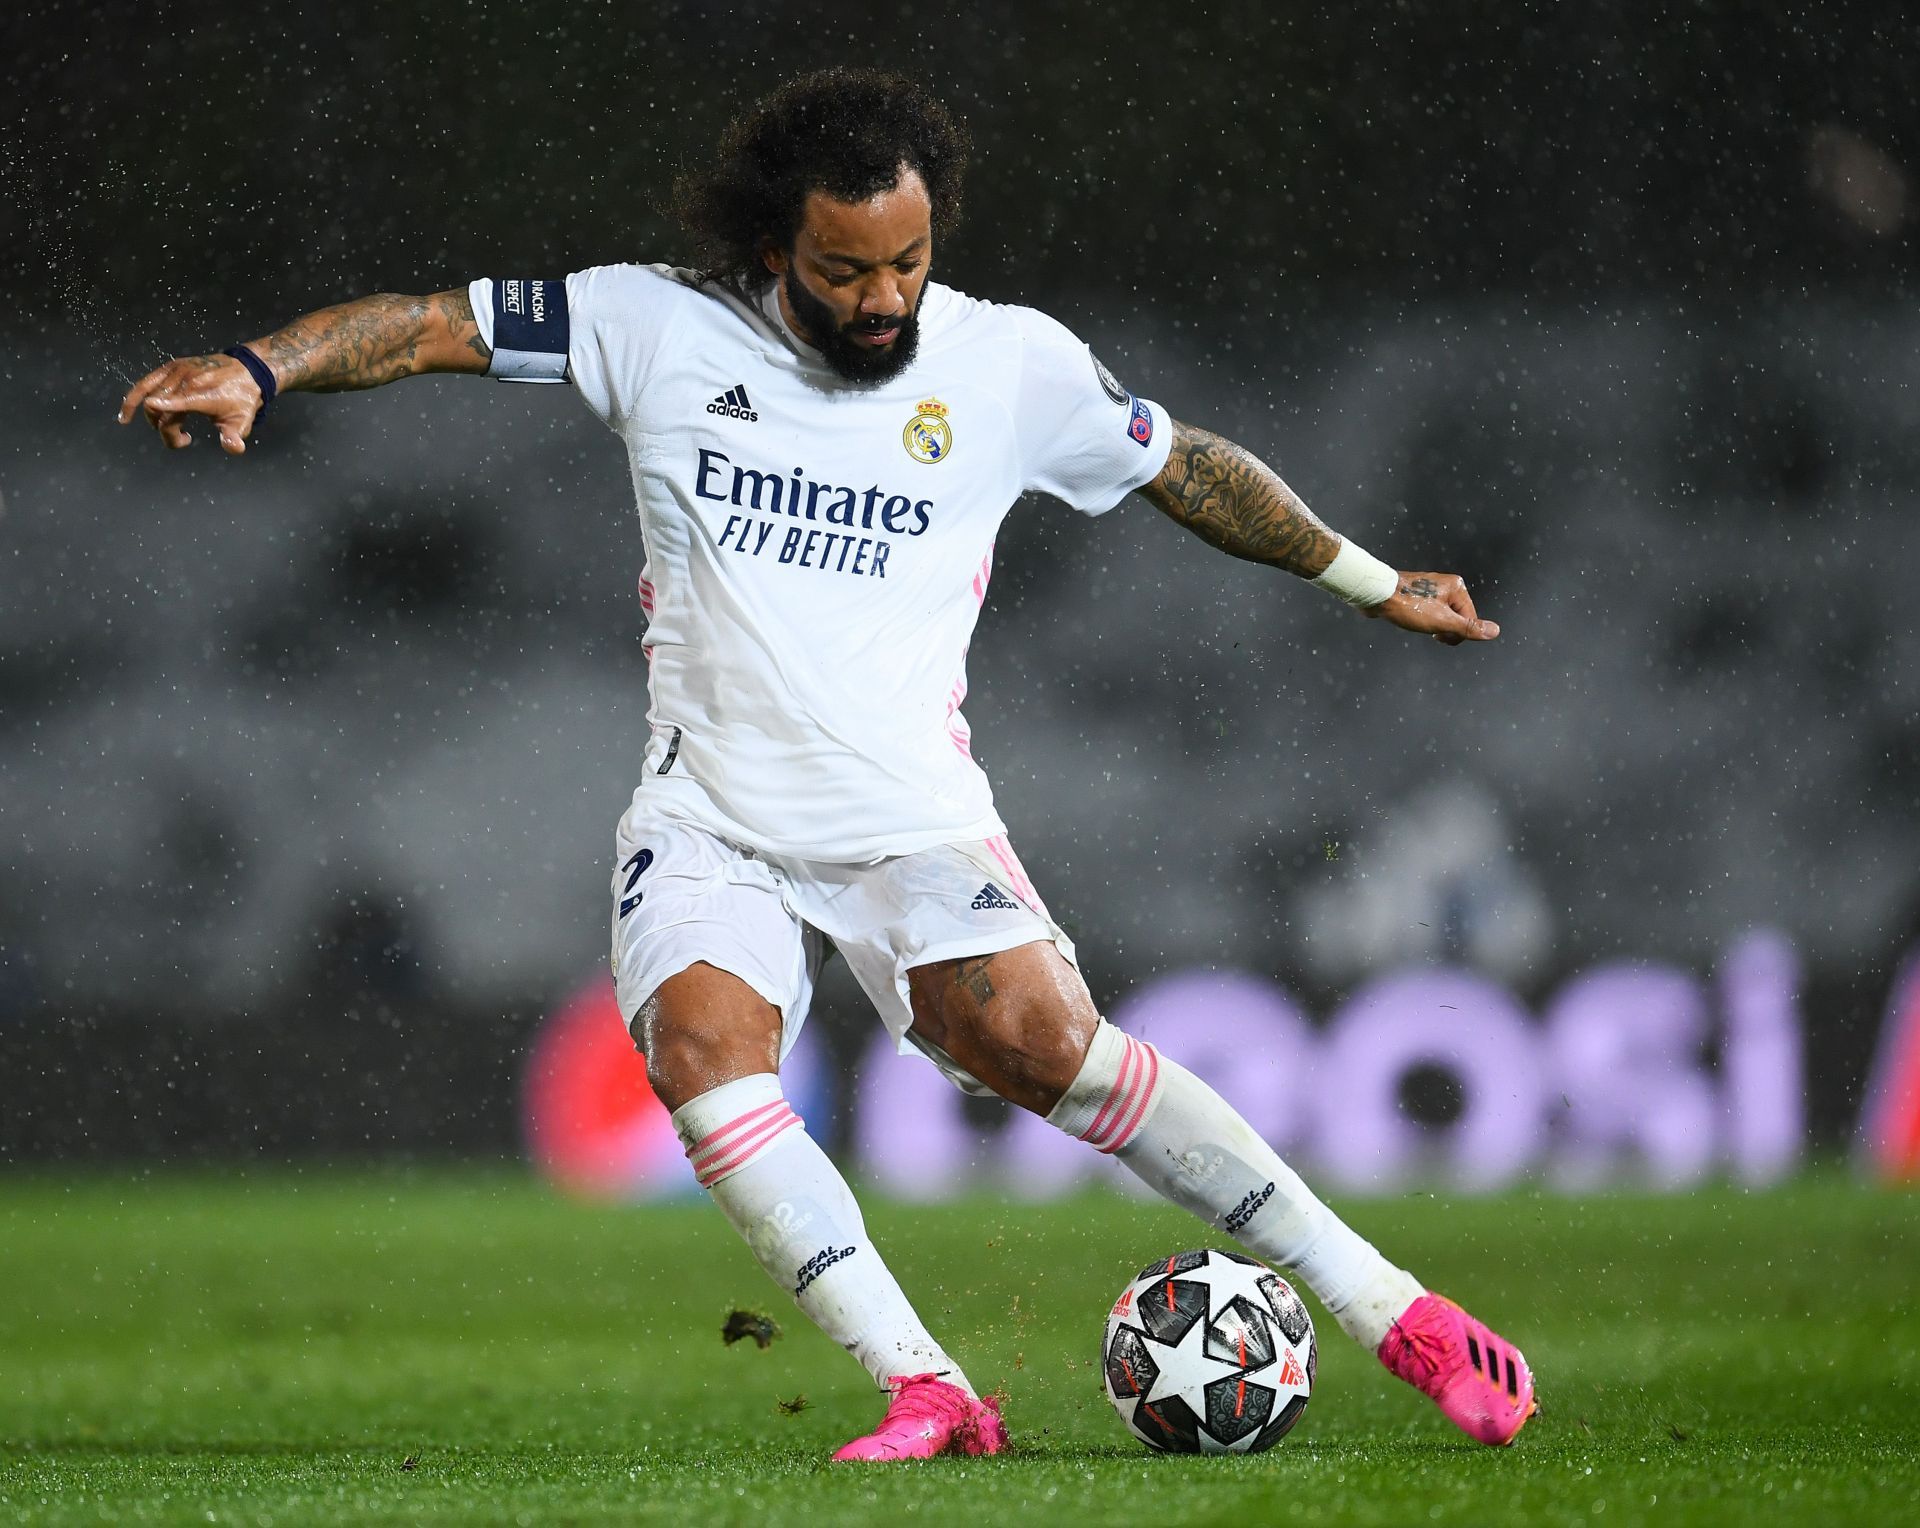 Marcelo is generating interest ahead of his impending Real Madrid exit this summer.